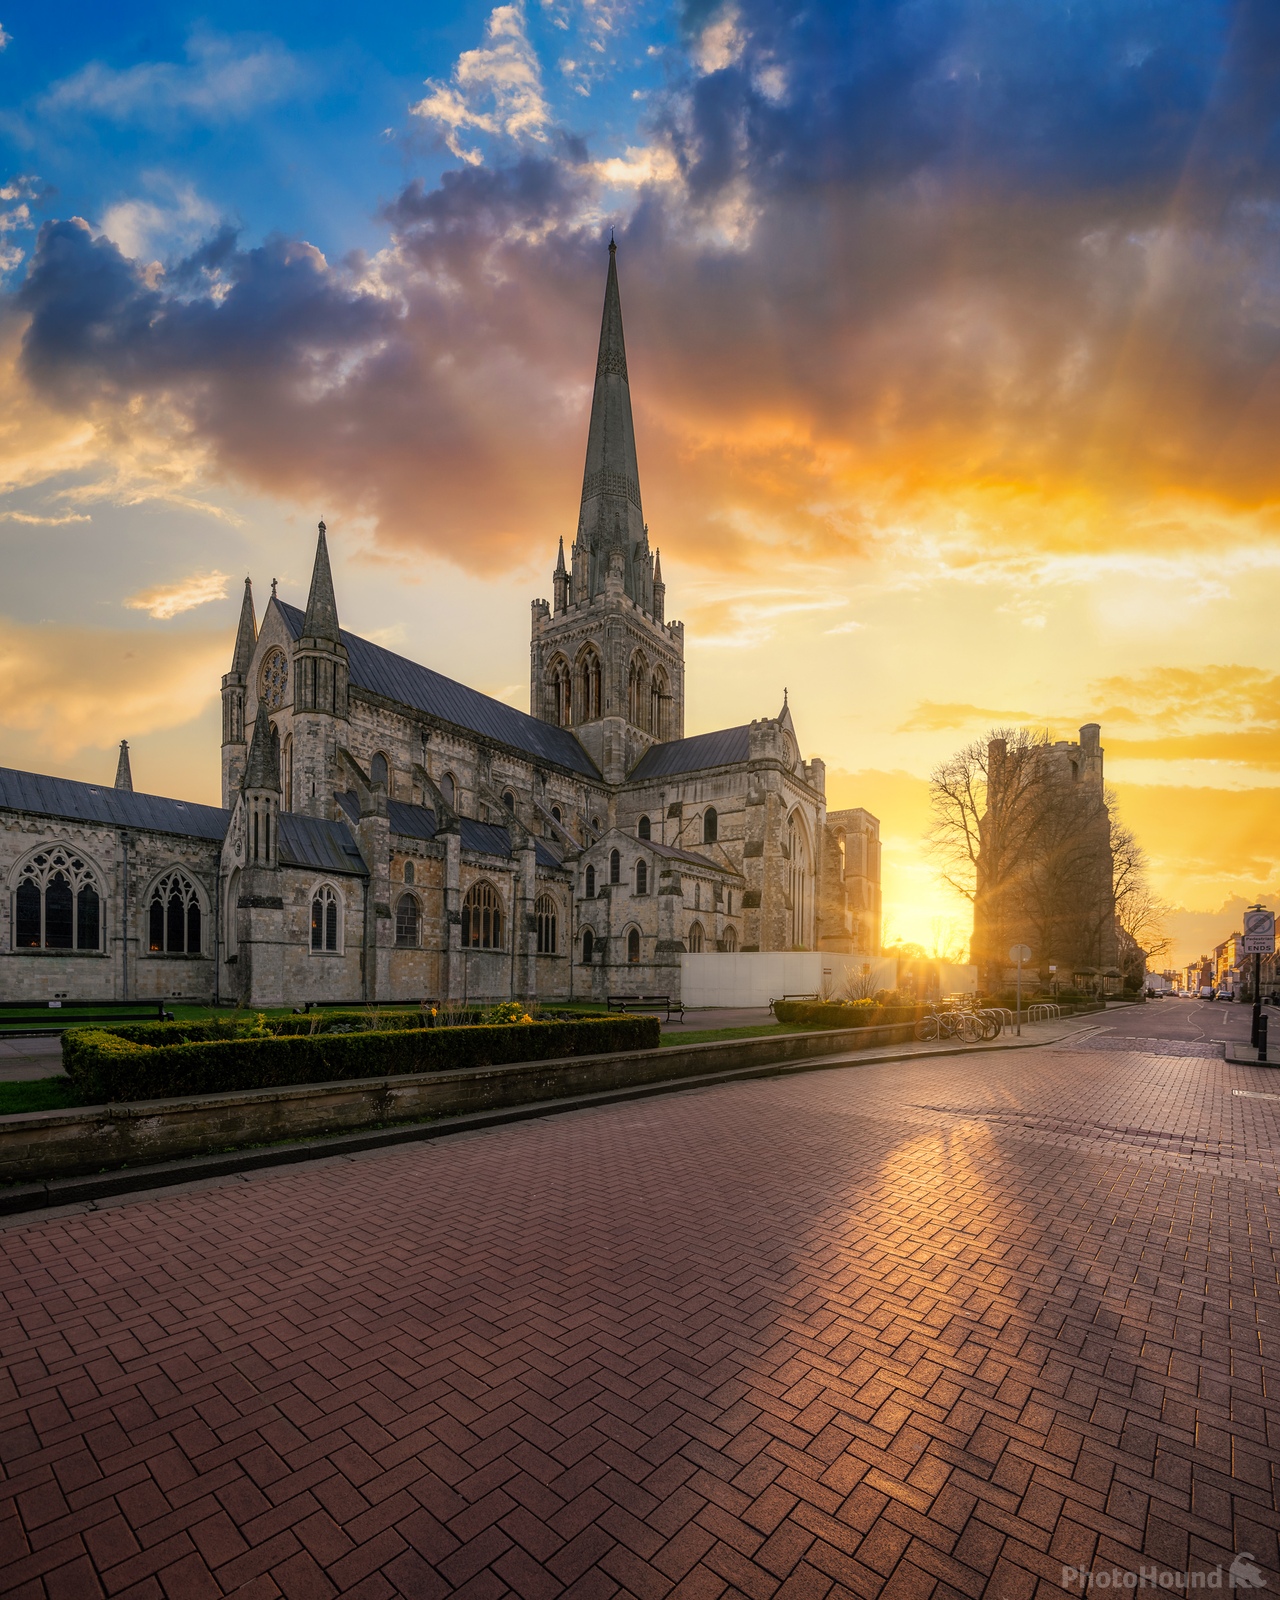 Image of Chichester Cathedral by Jakub Bors